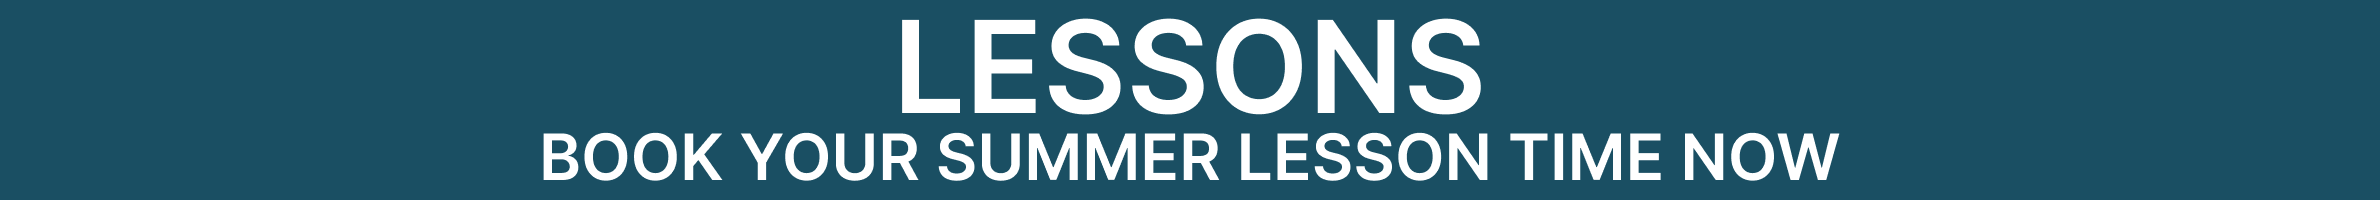 Book your summer lesson time now